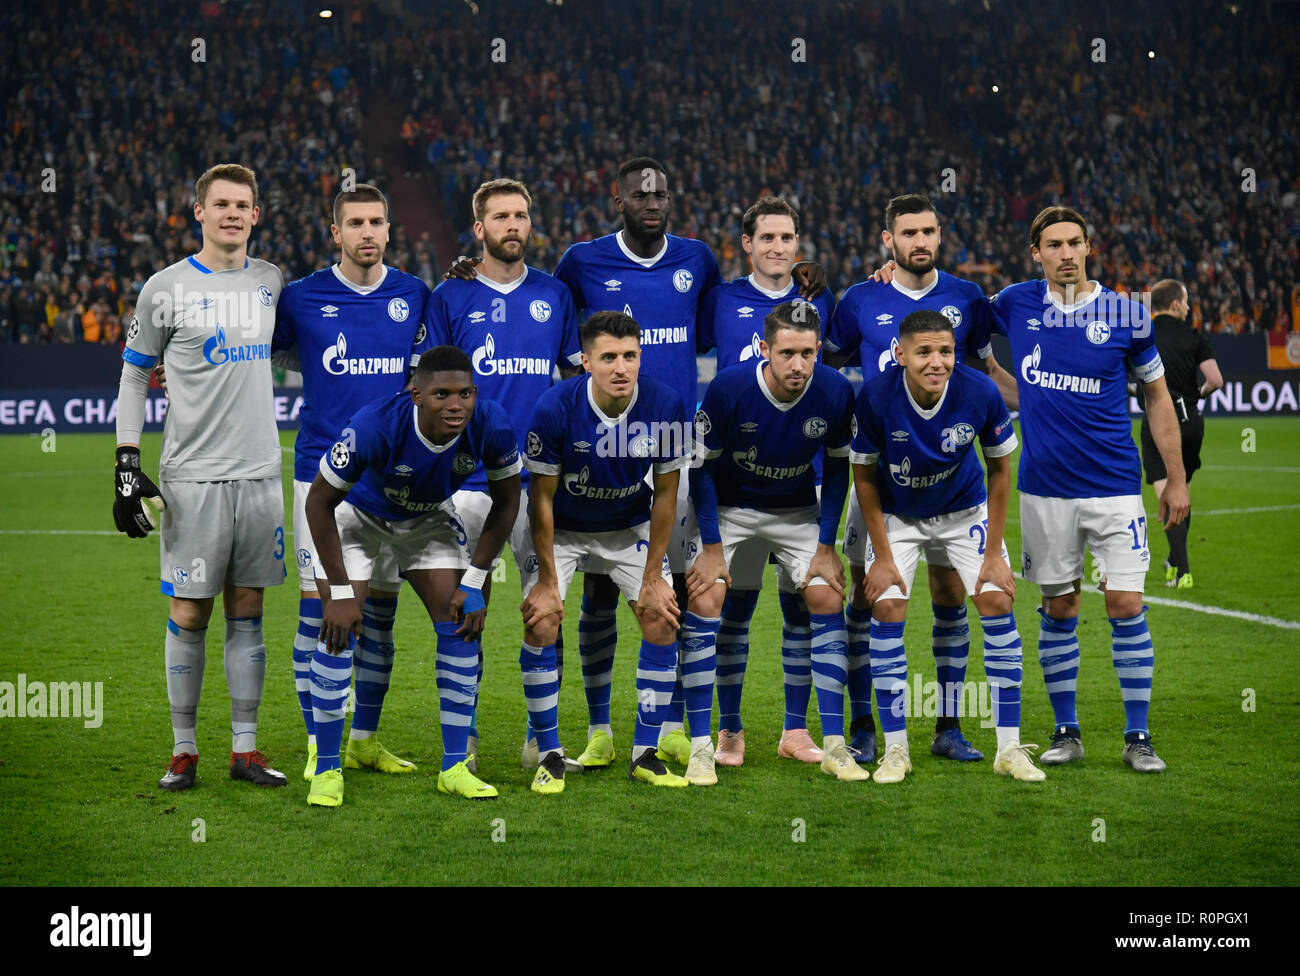 Gelsenkirchen, Germany. 06th Nov, 2018. Soccer: Champions League, FC Schalke  04 - Galatasaray Istanbul, Group stage, Group D, Matchday 4 in the Veltins  Arena. The players of Schalke stand for a team